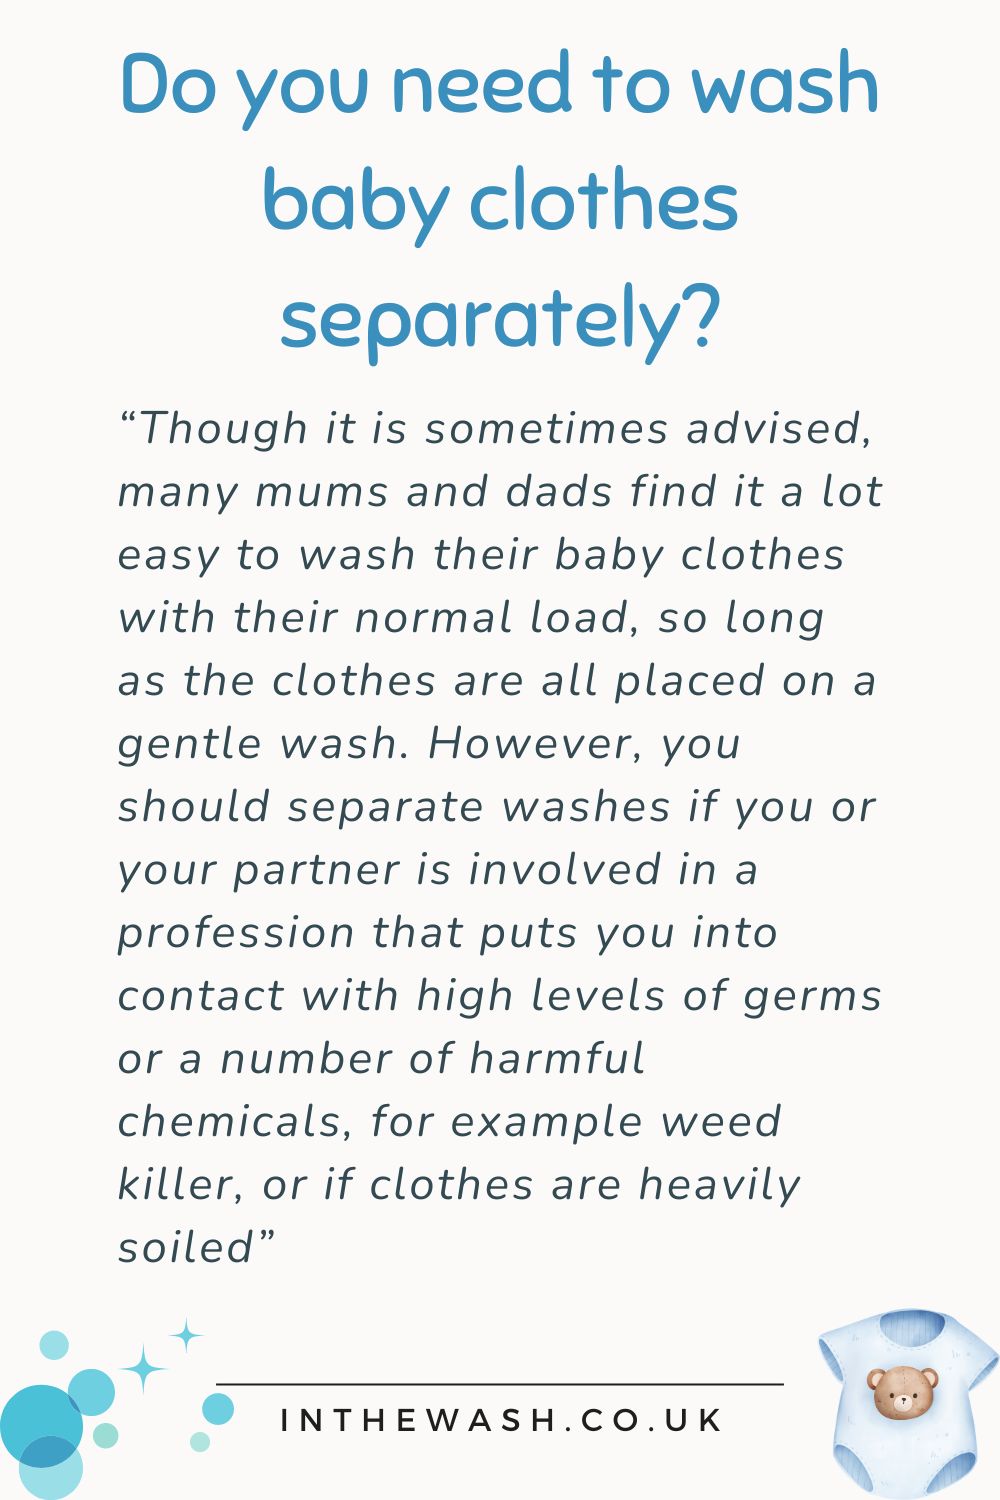 Do You Have to Wash Baby Clothes Separately?